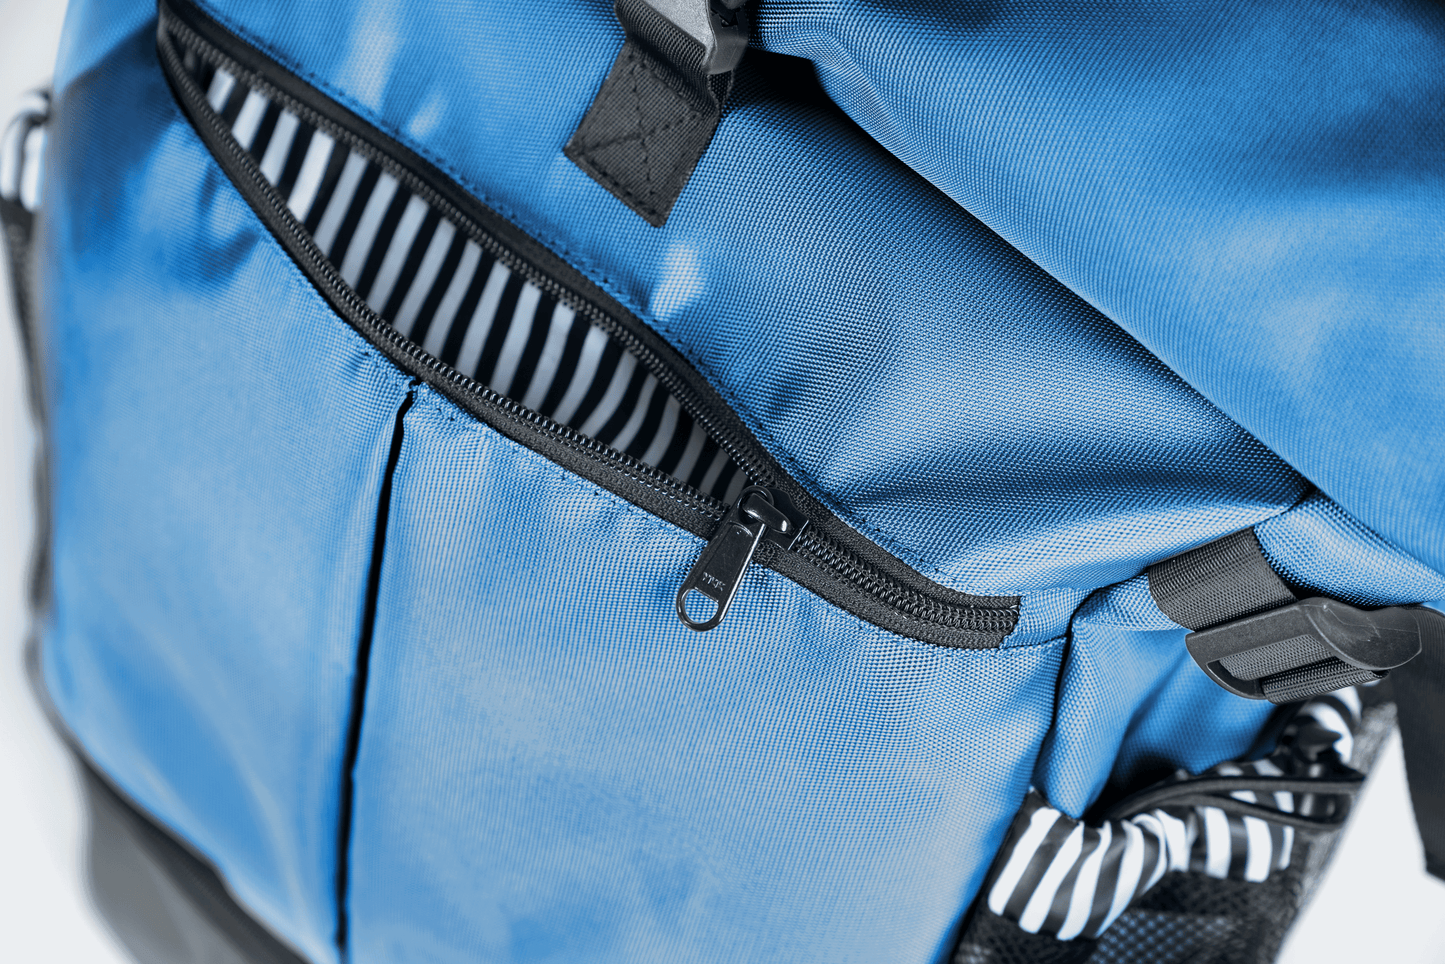 The Roo betty Nyx back pack uses YKK zips to ensure  quality and longevity 